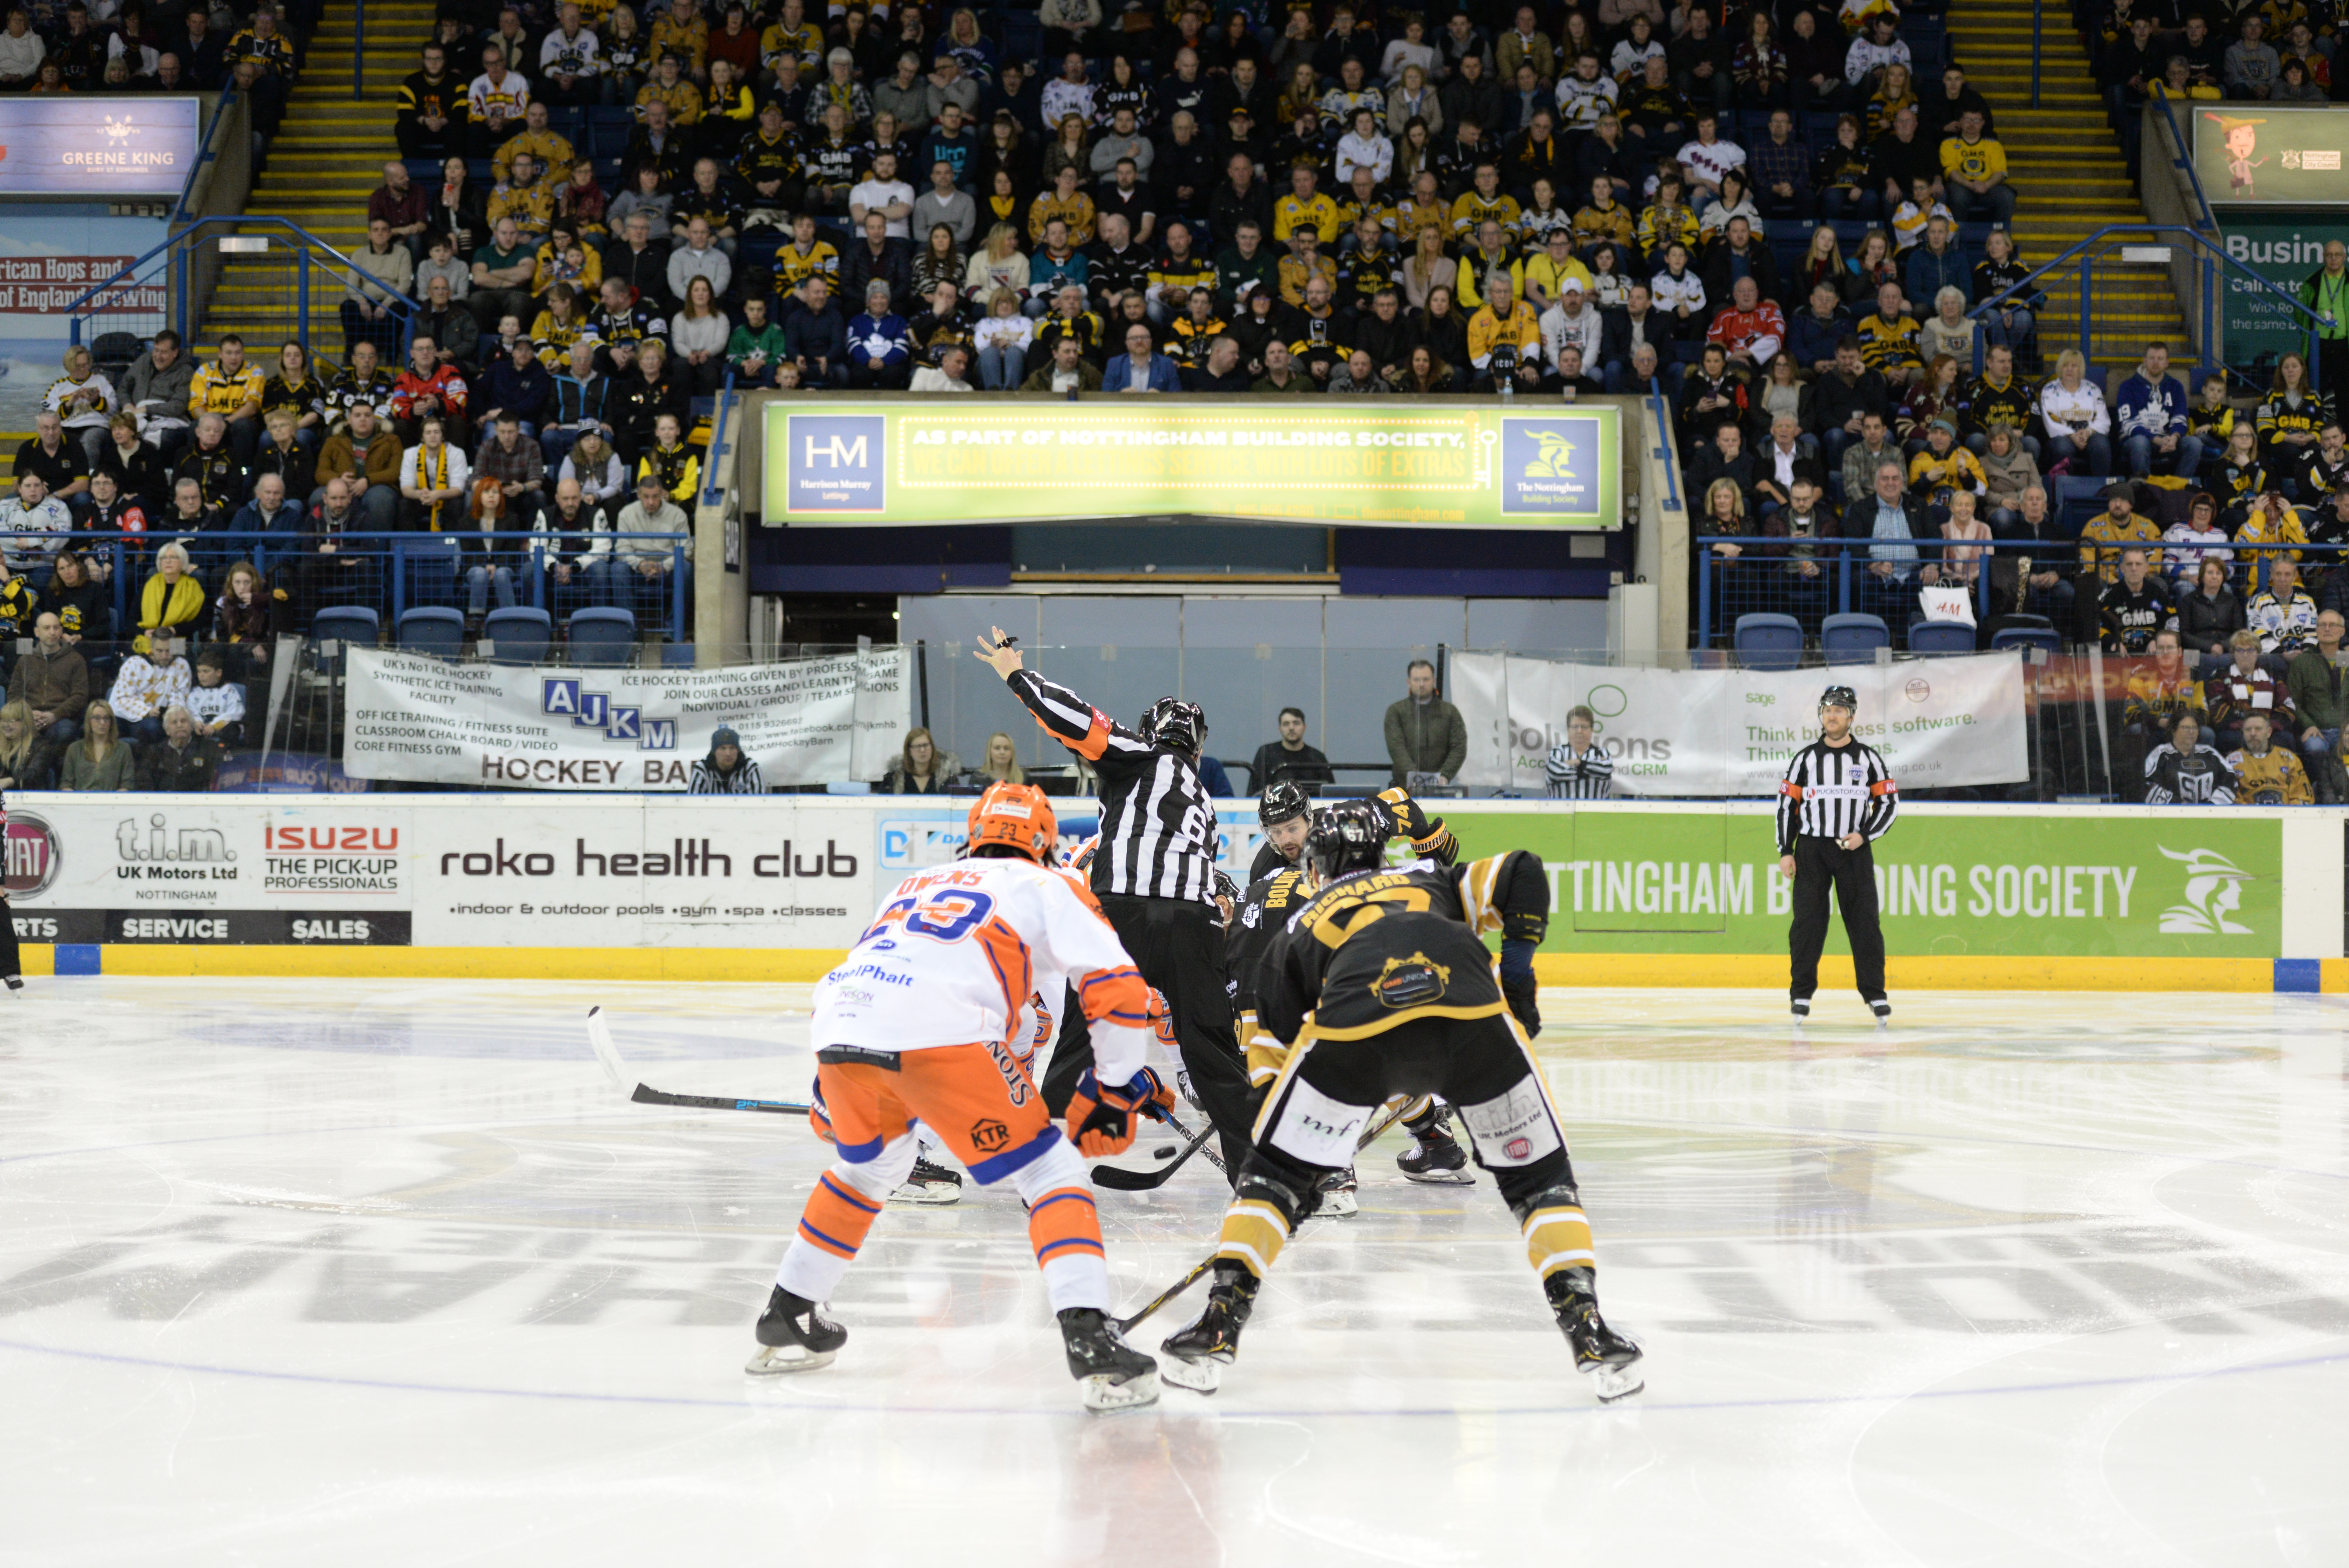 Highlights: Panthers vs Steelers - 16/02/19 Top Image